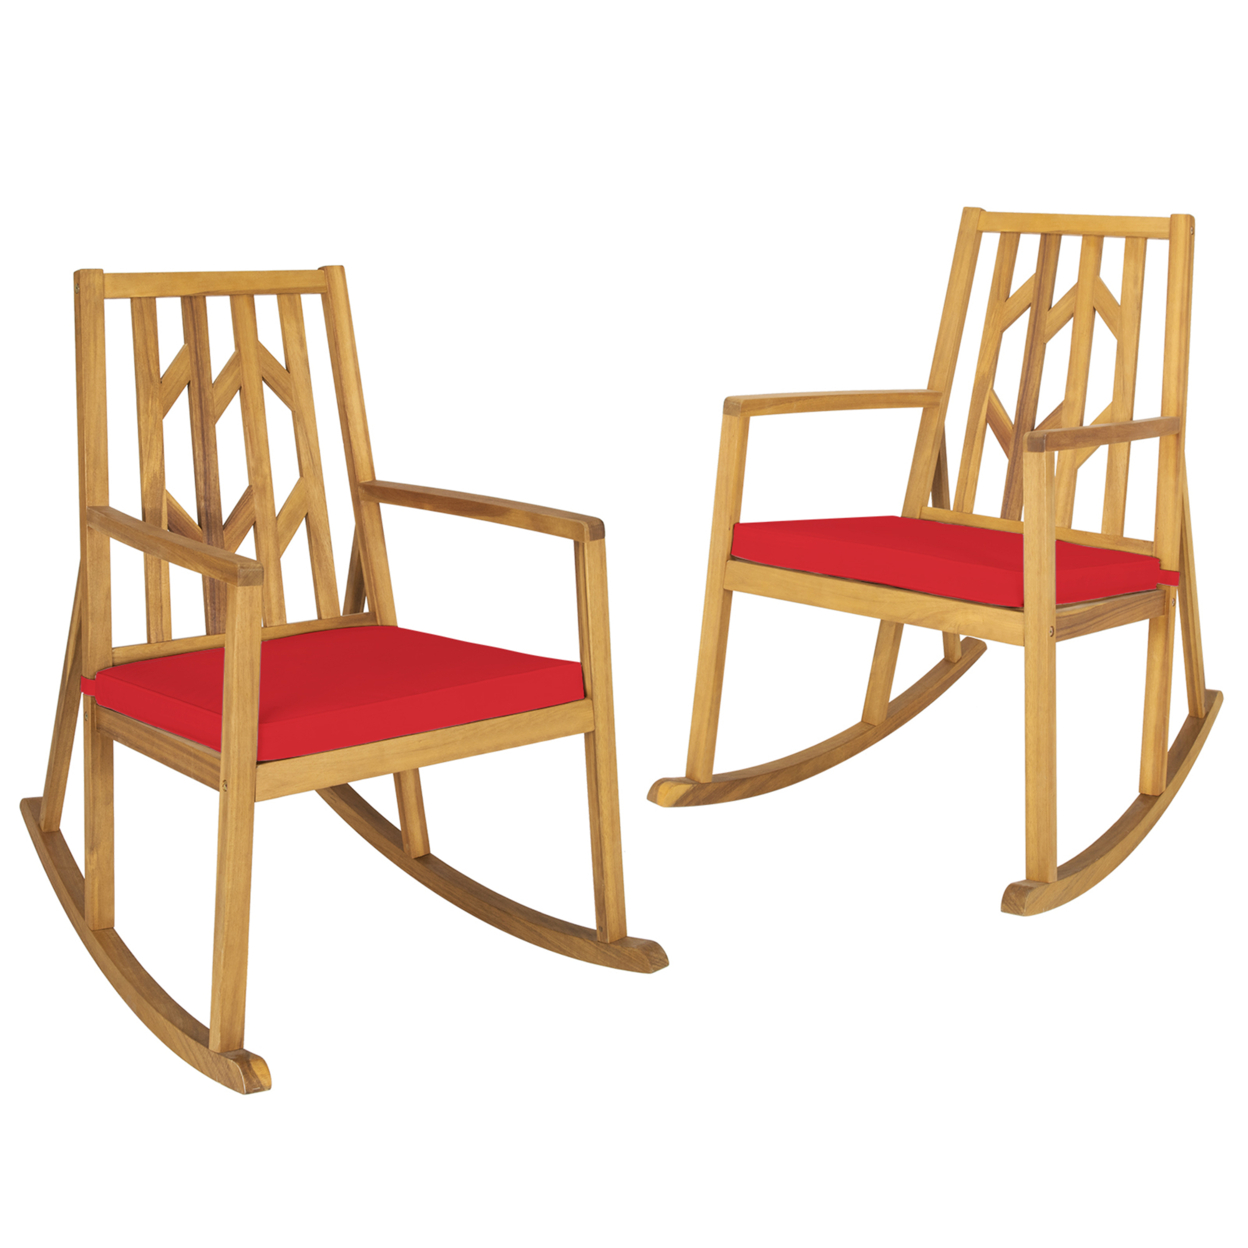 Set Of 2 Outdoor Acacia Wood Rocking Chair Wooden Patio Rocker W/ Red Cushion